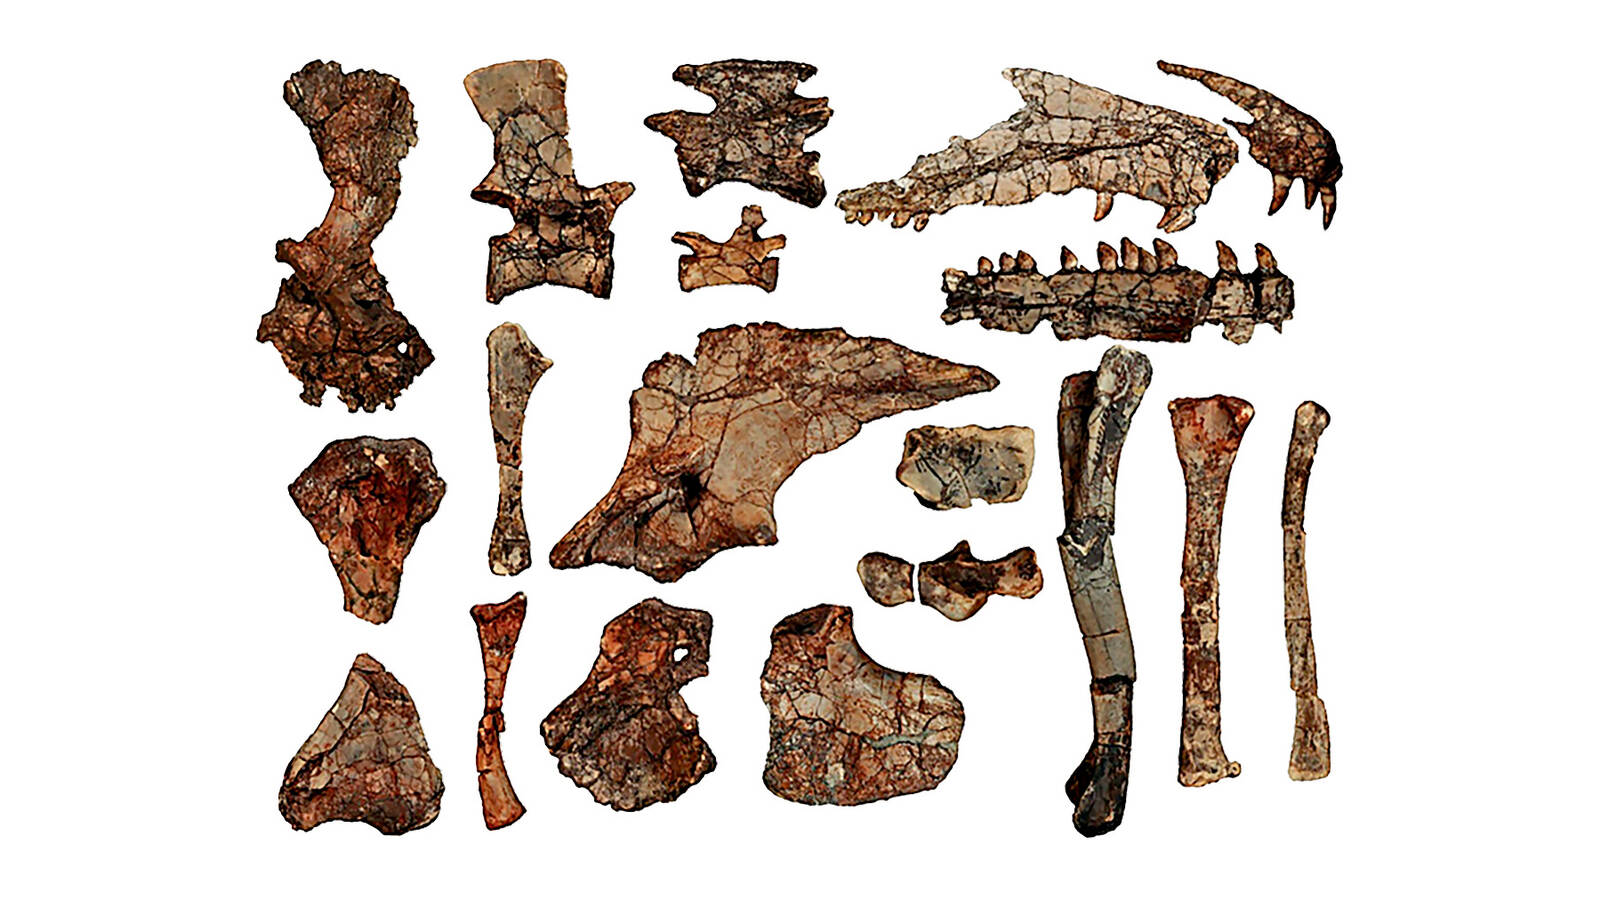 <p>A sampling of the 220-million-year-old <em>P. traverorum</em> bones excavated from the Dying Grounds.</p>